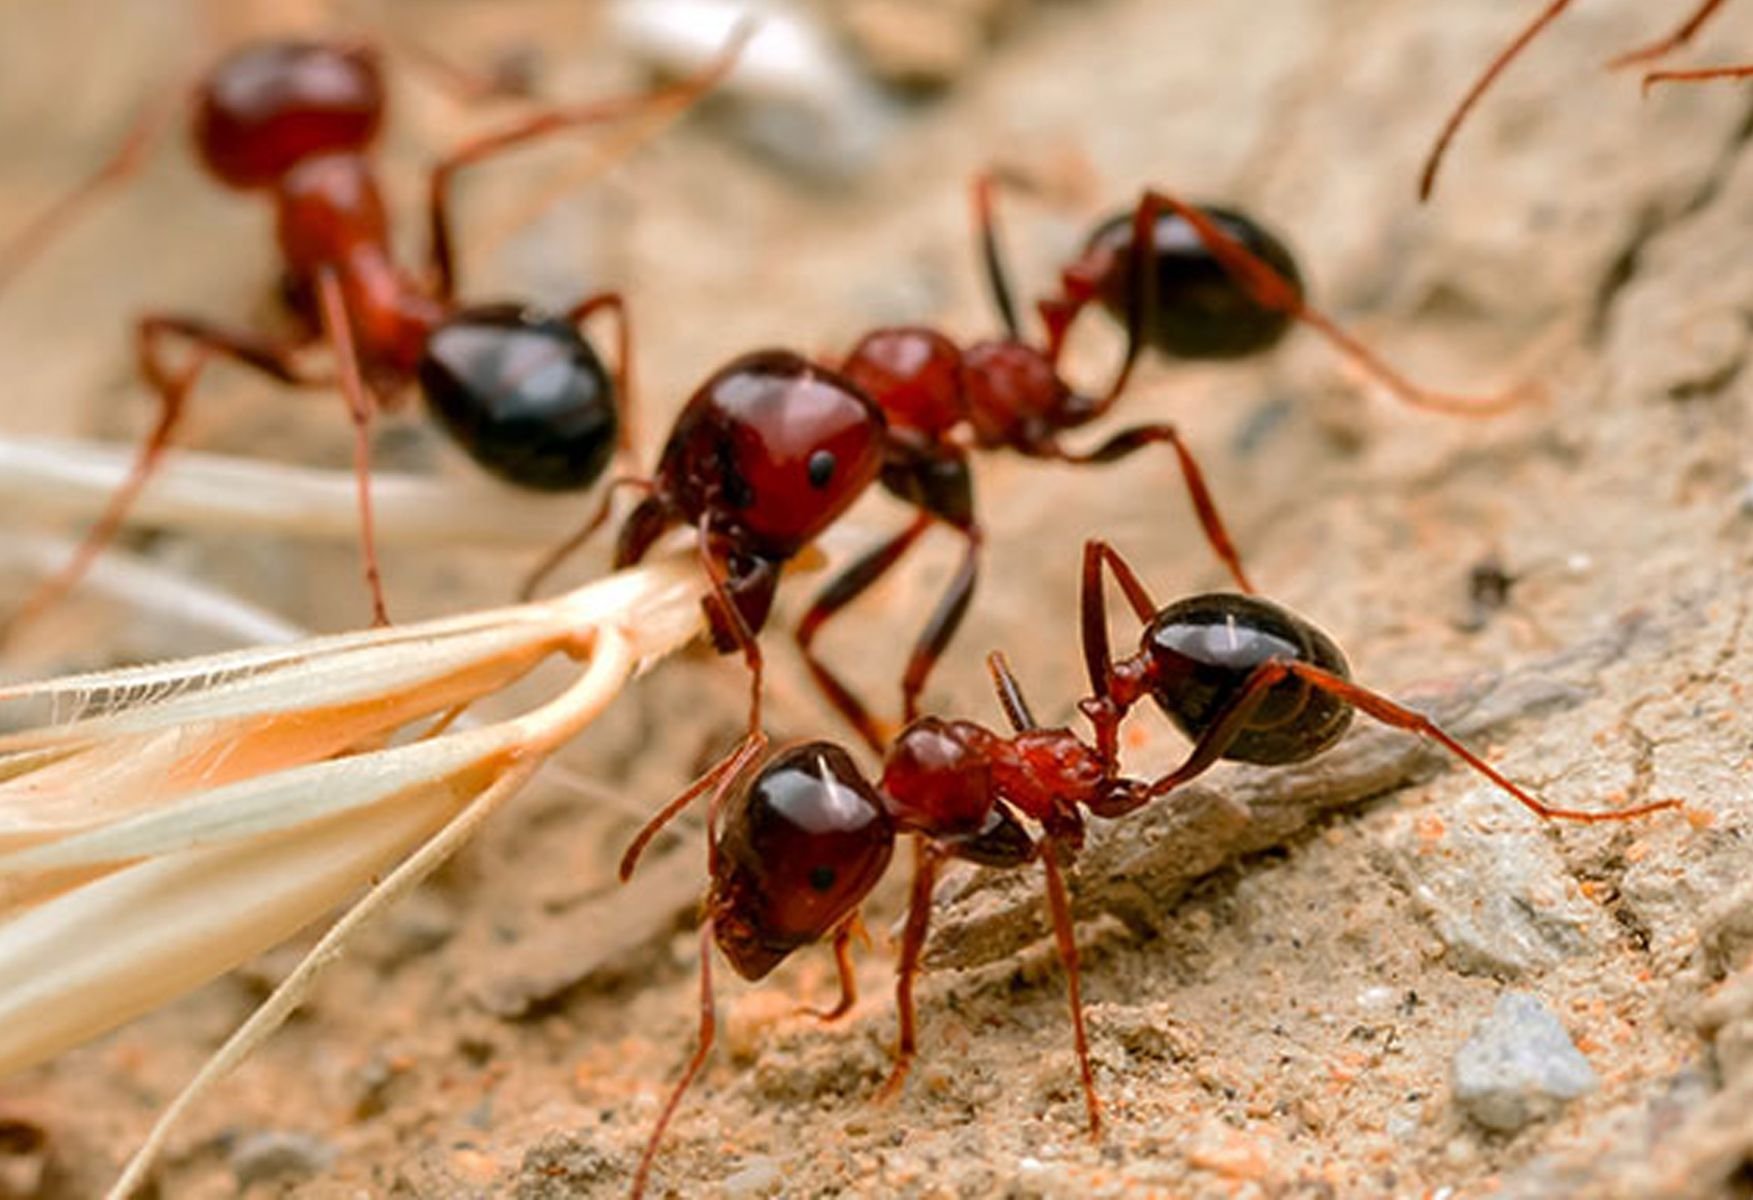 How important are the Legs for the orientation of Ants?